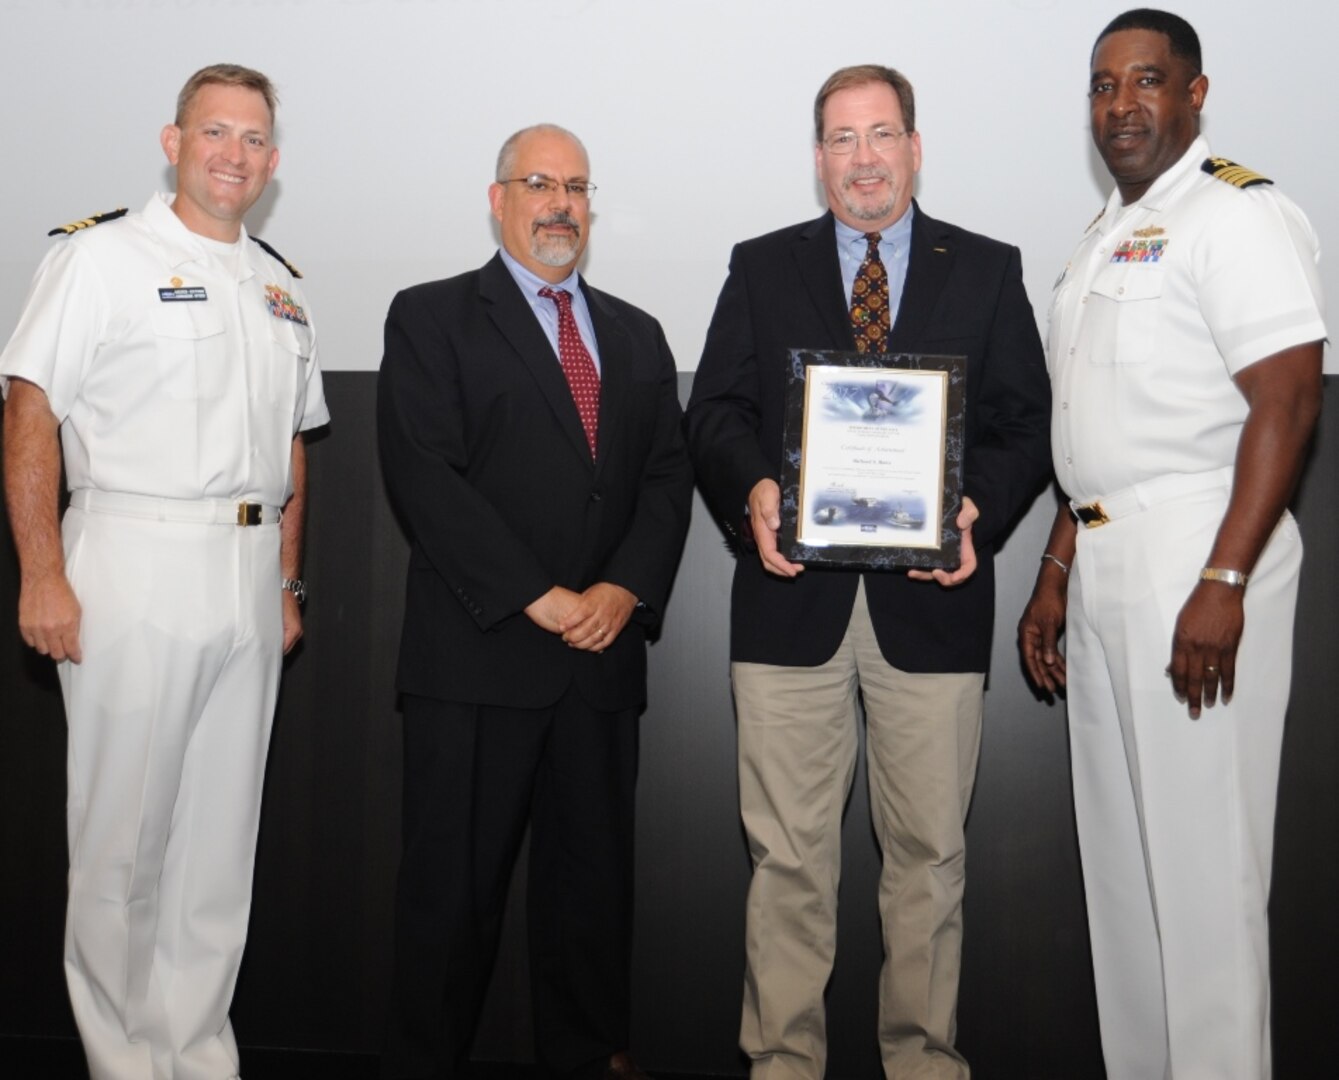 IMAGE: DAHLGREN, Va. - Richard Rowe receives his certificate of achievement from Naval Surface Warfare Center Dahlgren Division (NSWCDD) Technical Director John Fiore, NSWCDD Commanding Officer Capt. Godfrey 'Gus' Weekes, right, and Combat Direction Systems Activity Dam Neck Commanding Officer Cmdr. Andrew Hoffman at the 2017 NSWCDD academic awards ceremony. Rowe was recognized for completing his master's in national security and strategic studies from the Naval  War College, and commended for his commitment to personal and professional development.